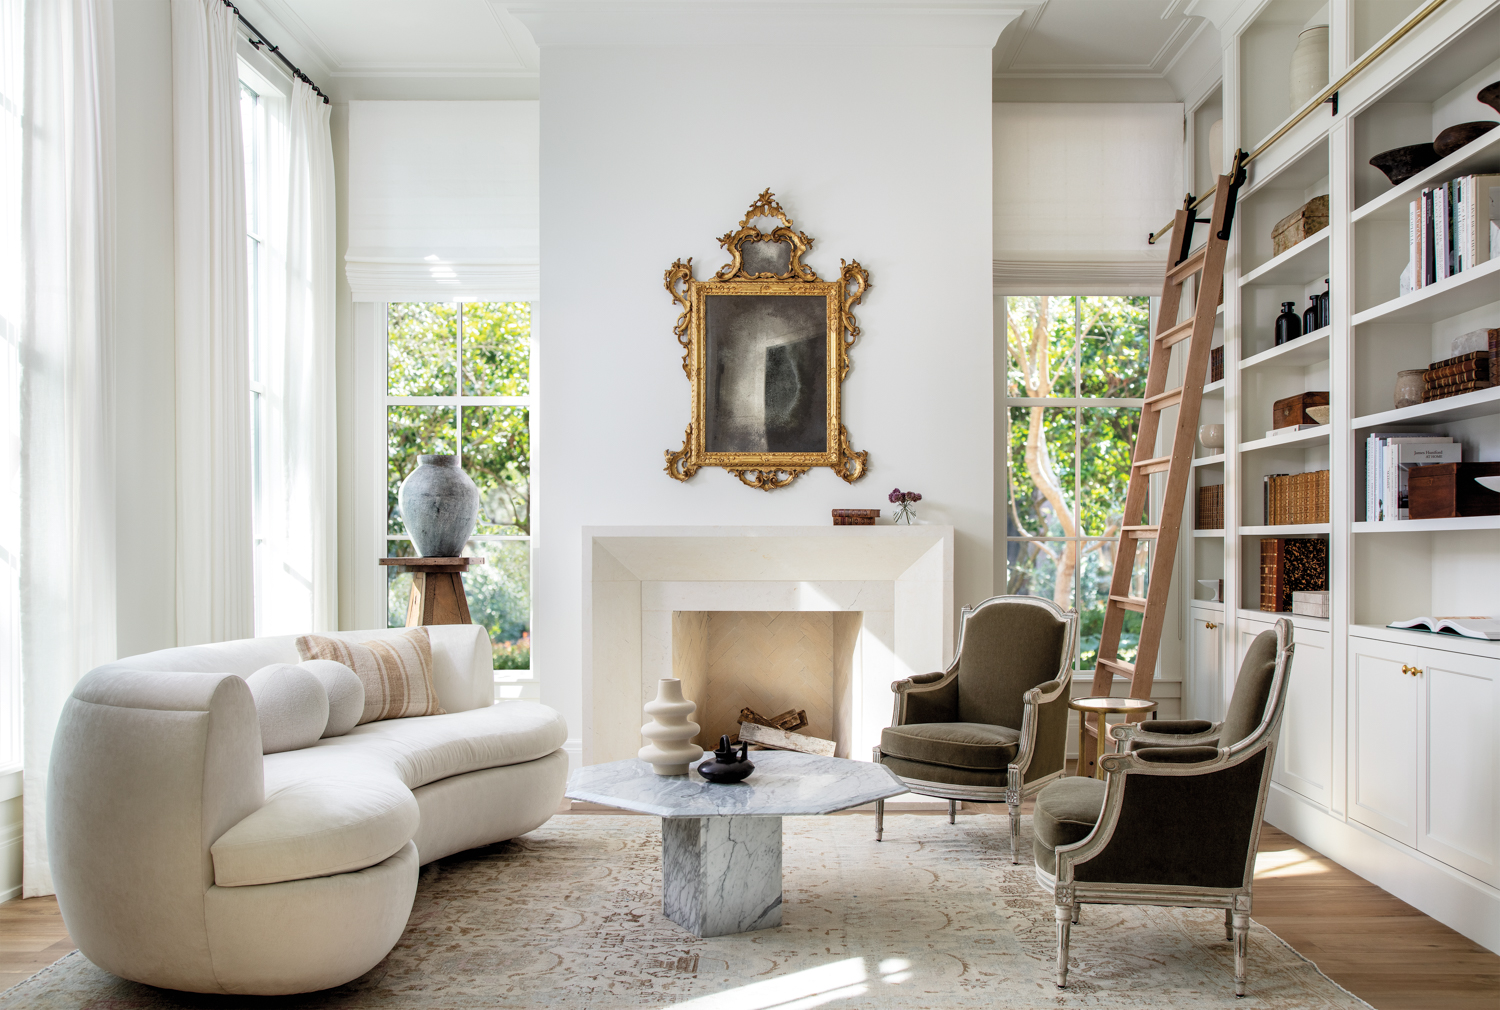 modern white parlor featuring a limestone mantel and antique furnishings